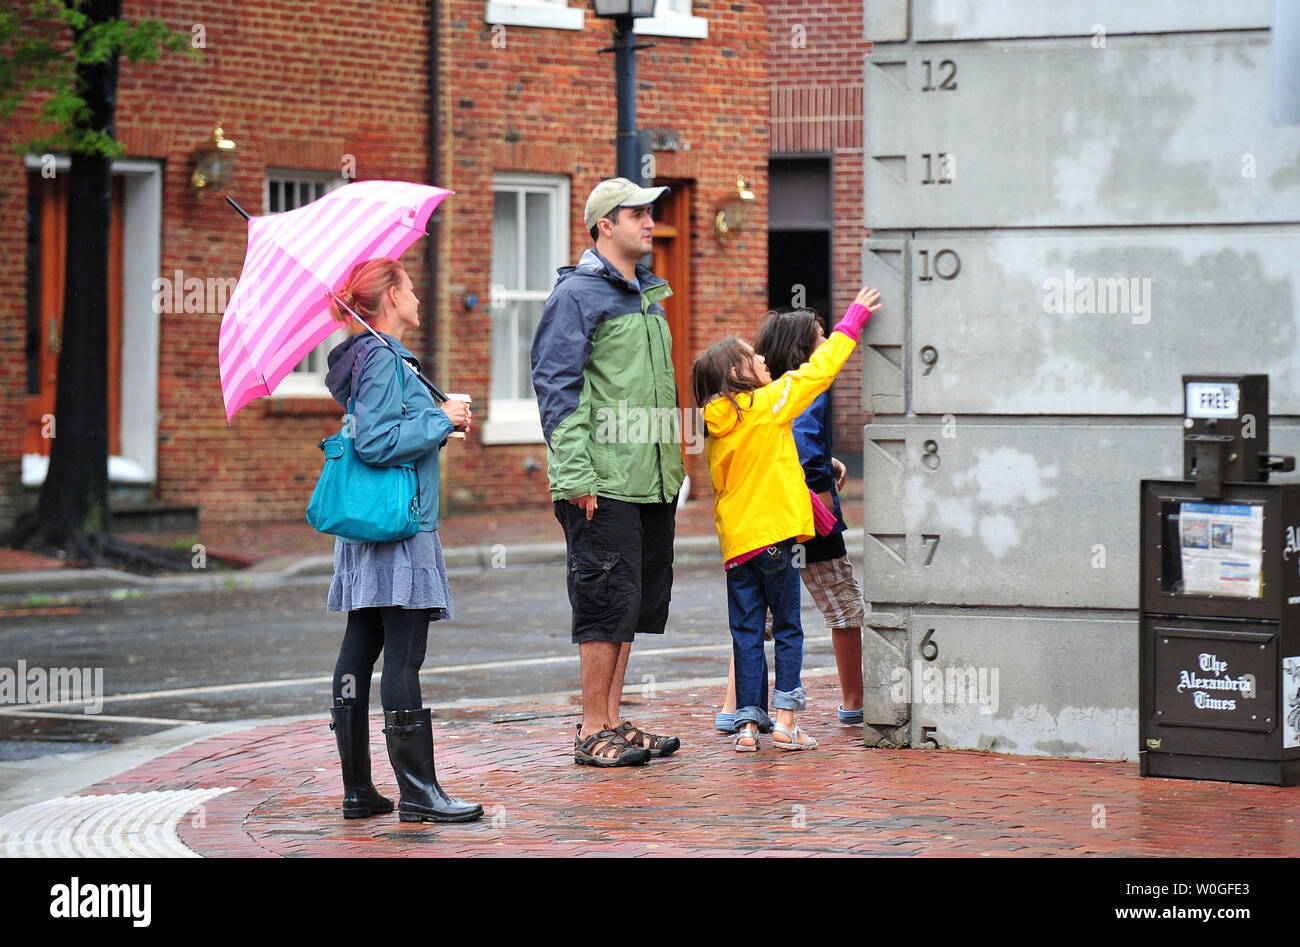 A family looks at a flood water gage in Old Town Alexandria, Virginia on August 28, 2011.  Hurricane Irene passed through the Washington Metro Area last night dropping over three inches of rain but did little damage. The storm has now been downgraded to a tropical storm as it heads towards New York.  UPI/Kevin Dietsch Stock Photo